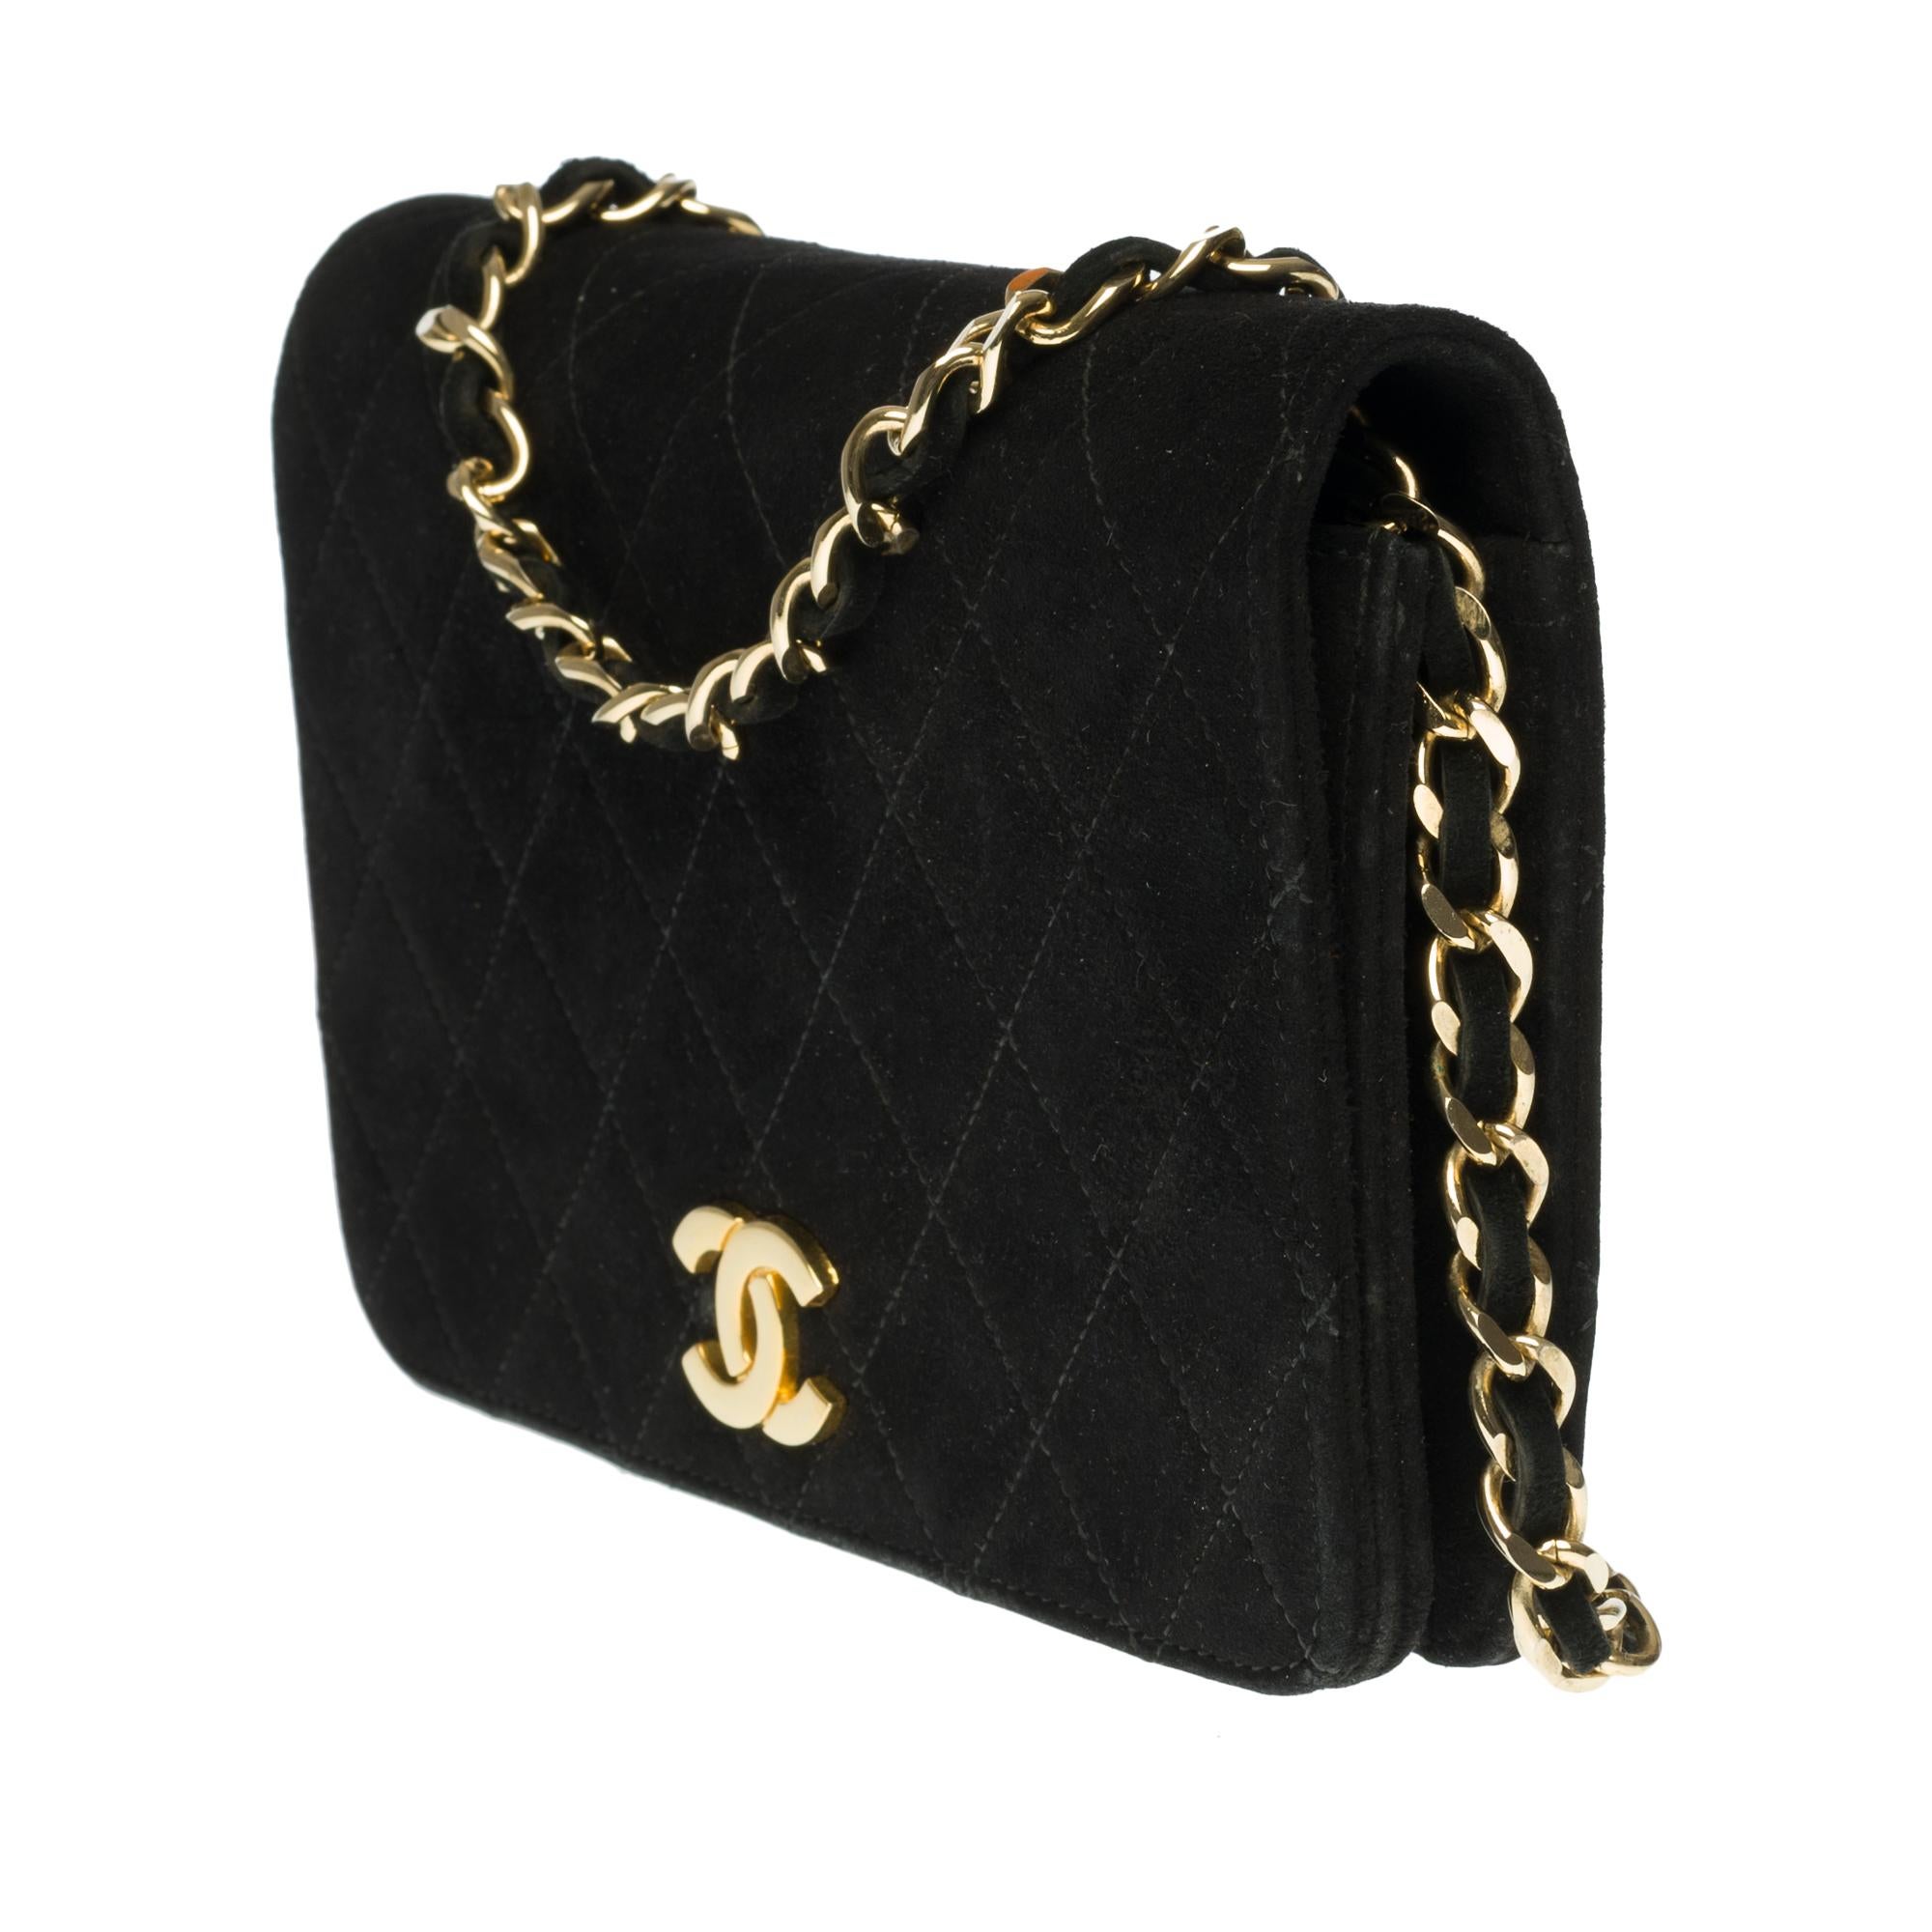 Black Chanel Classic Full Flap shoulder bag in black quilted Suede and gold hardware